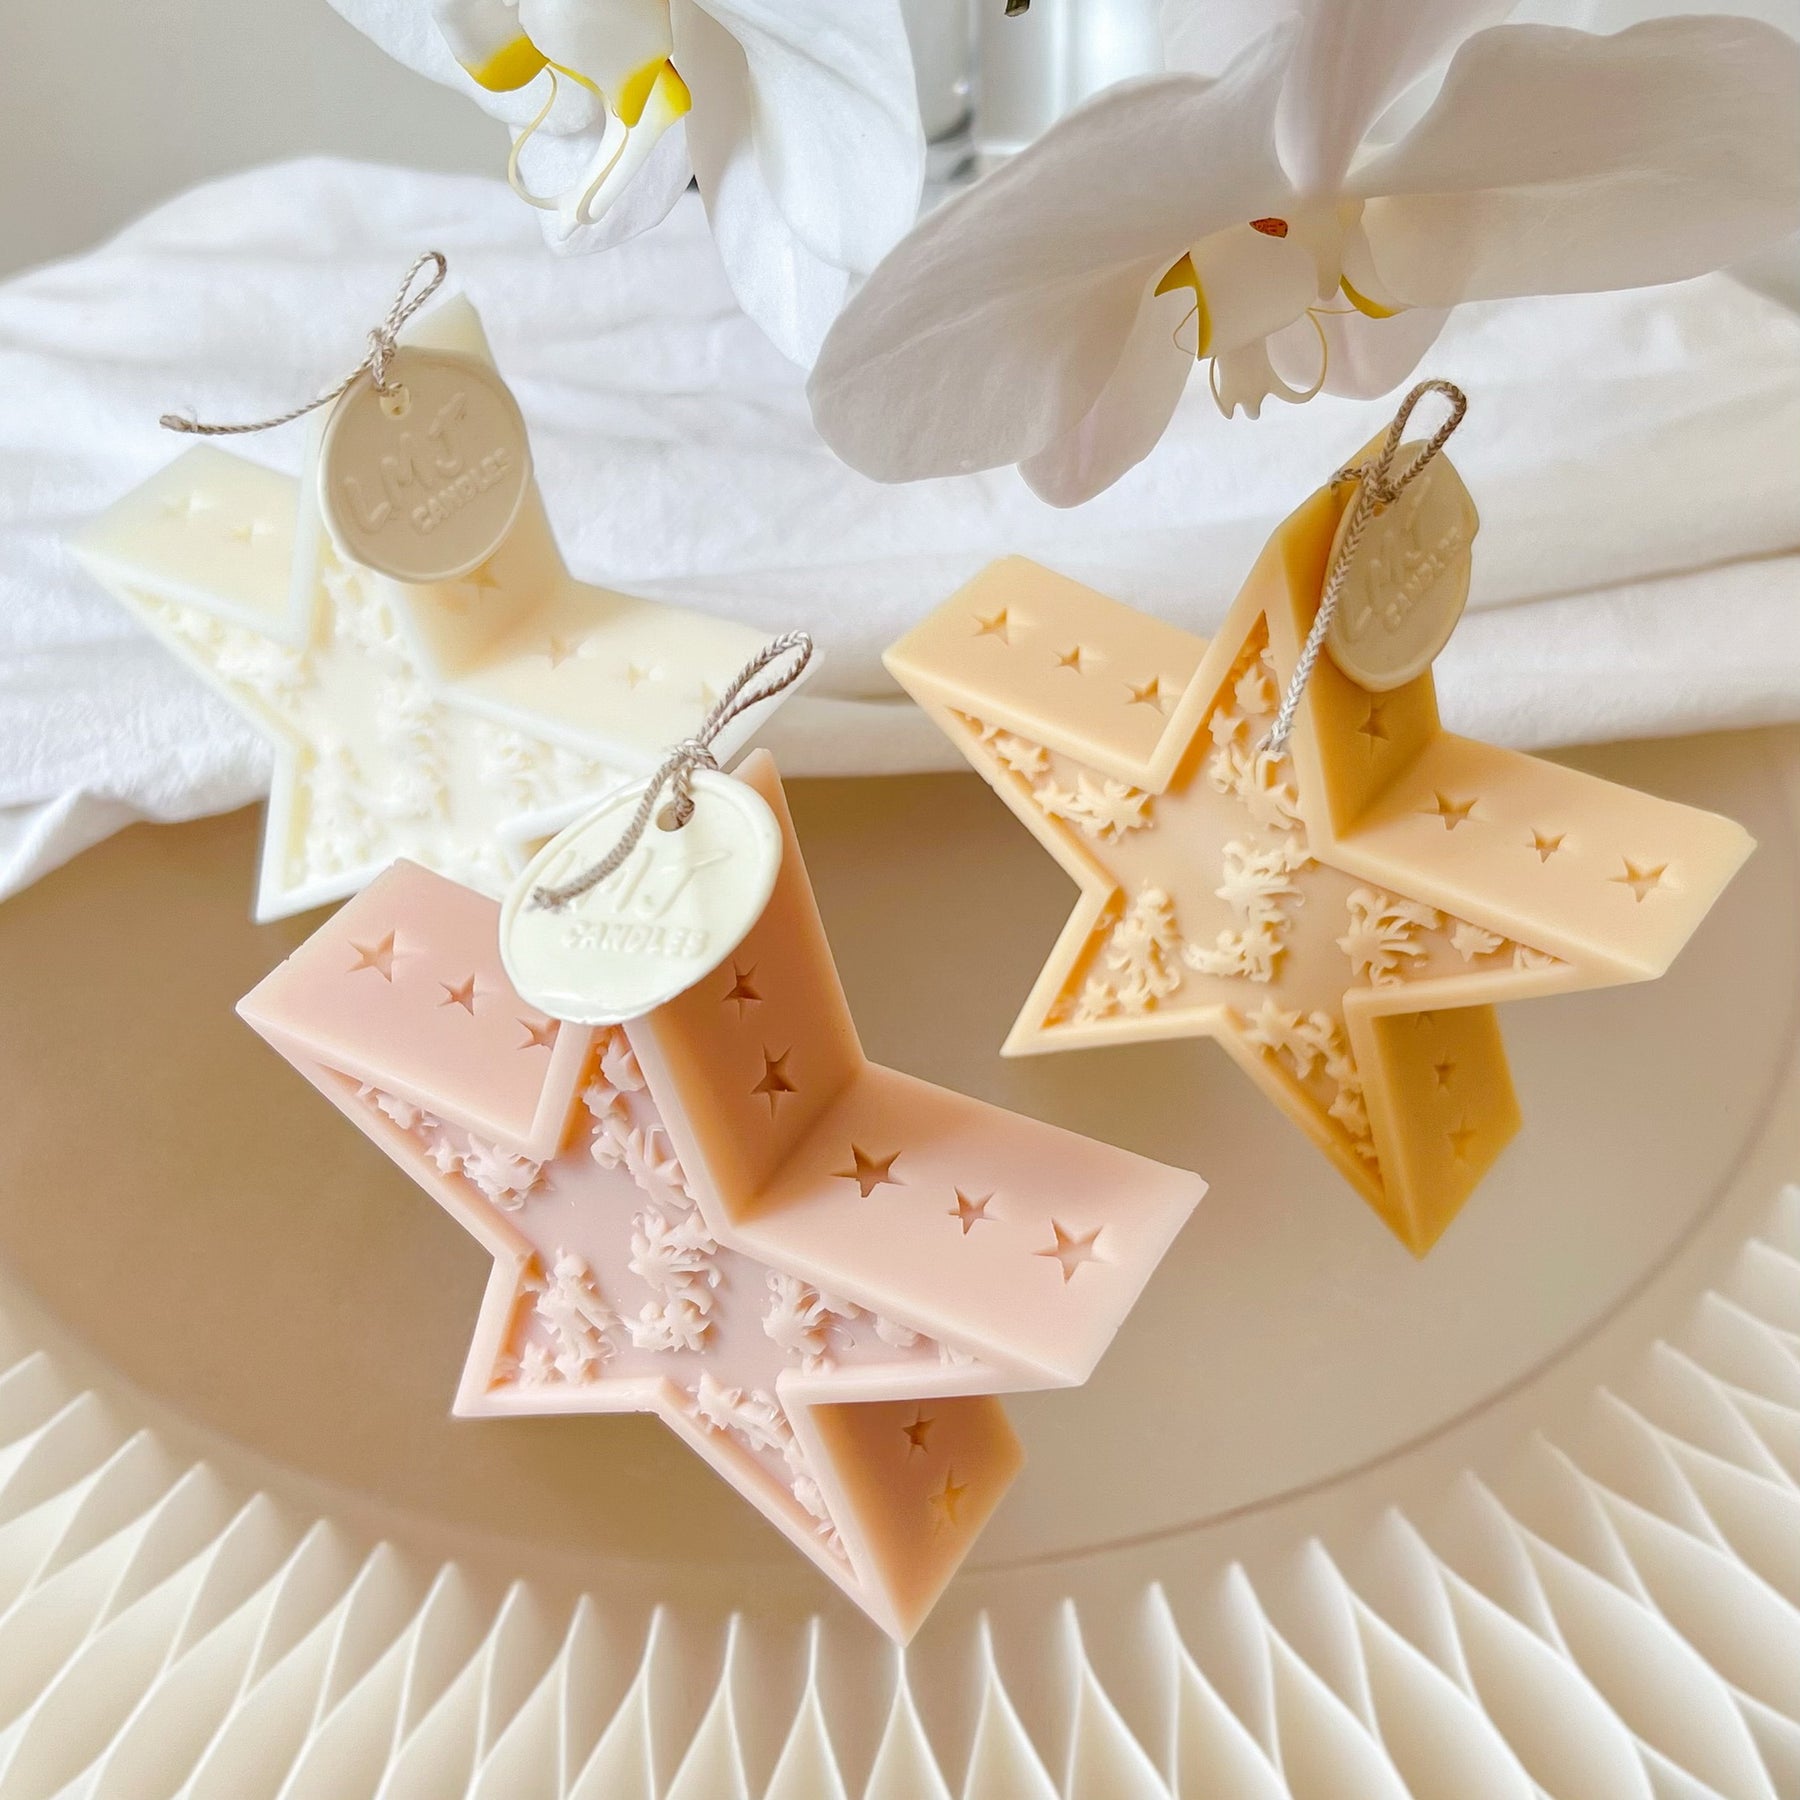 Star Shaped Ramadan Candle - Eid Décor & Gifts | LMJ Candles